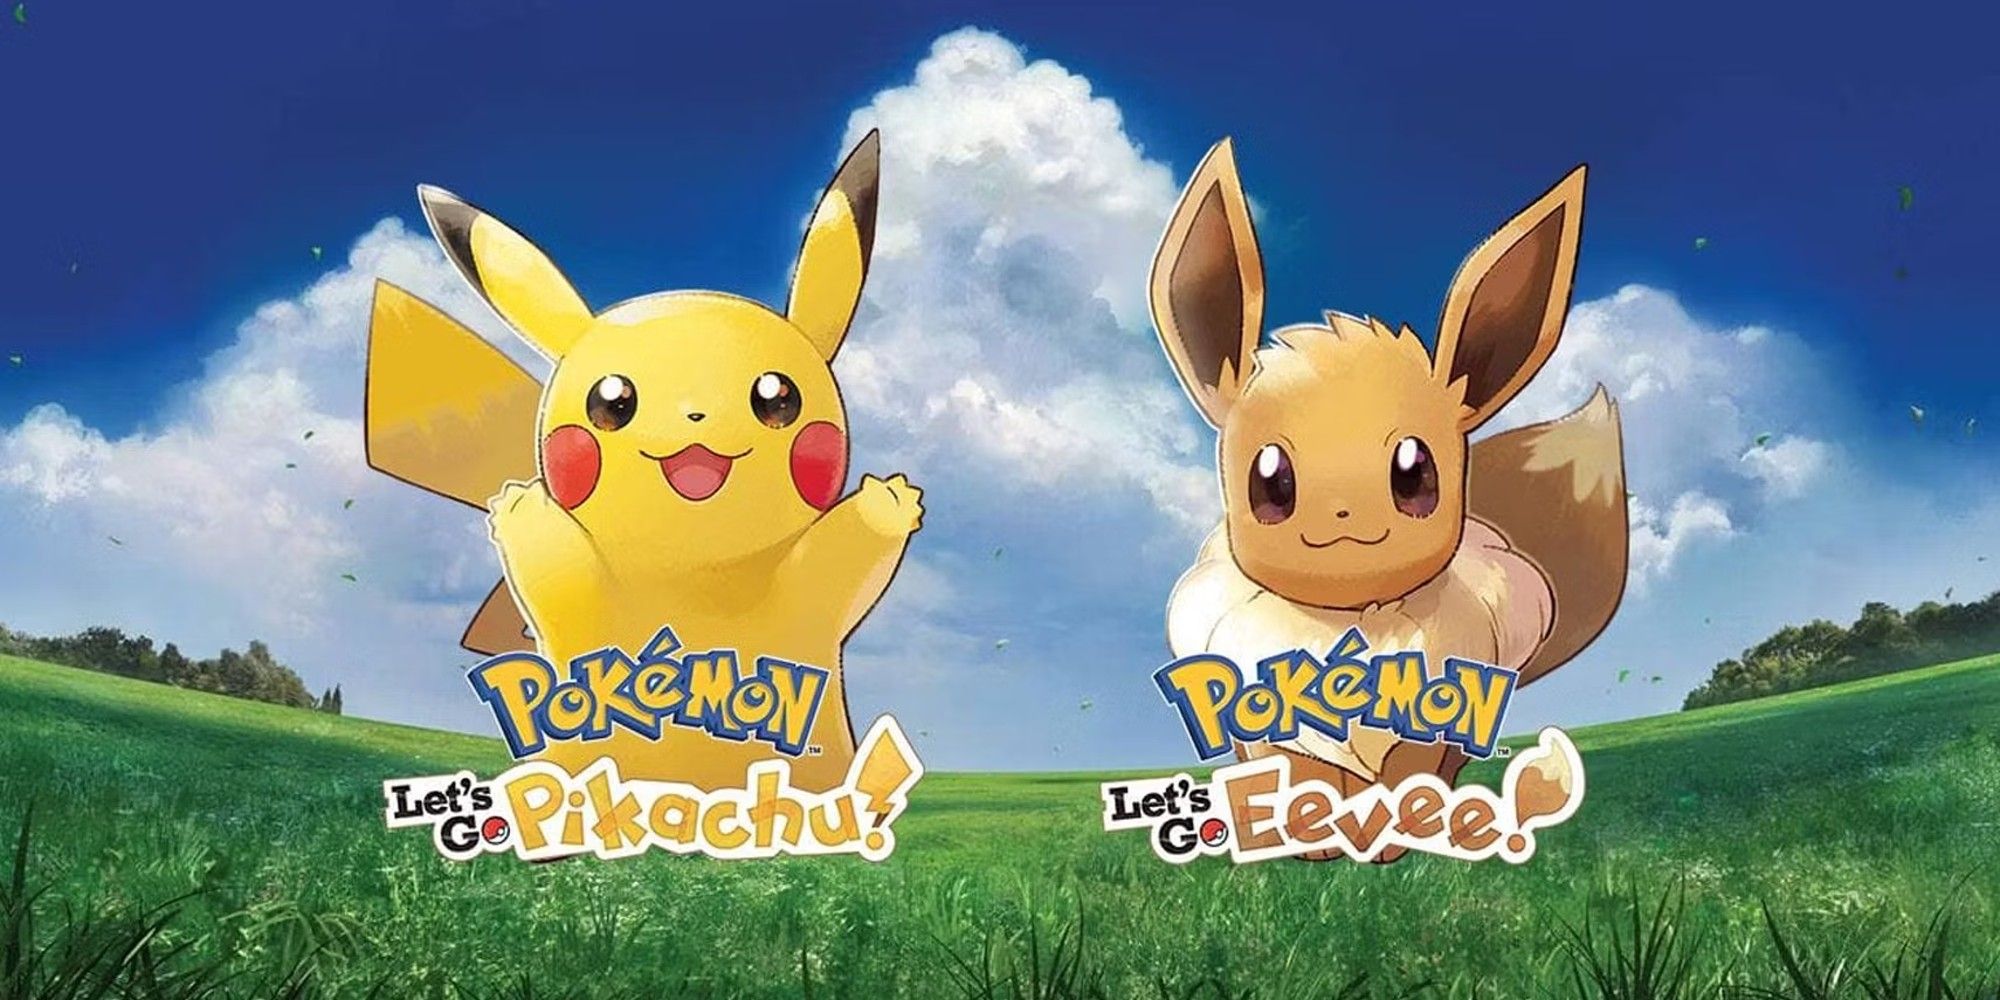 Pokemon Let's Go Pikachu and Eevee: Pikachu and Eevee in front of the grasslands, with the game logos